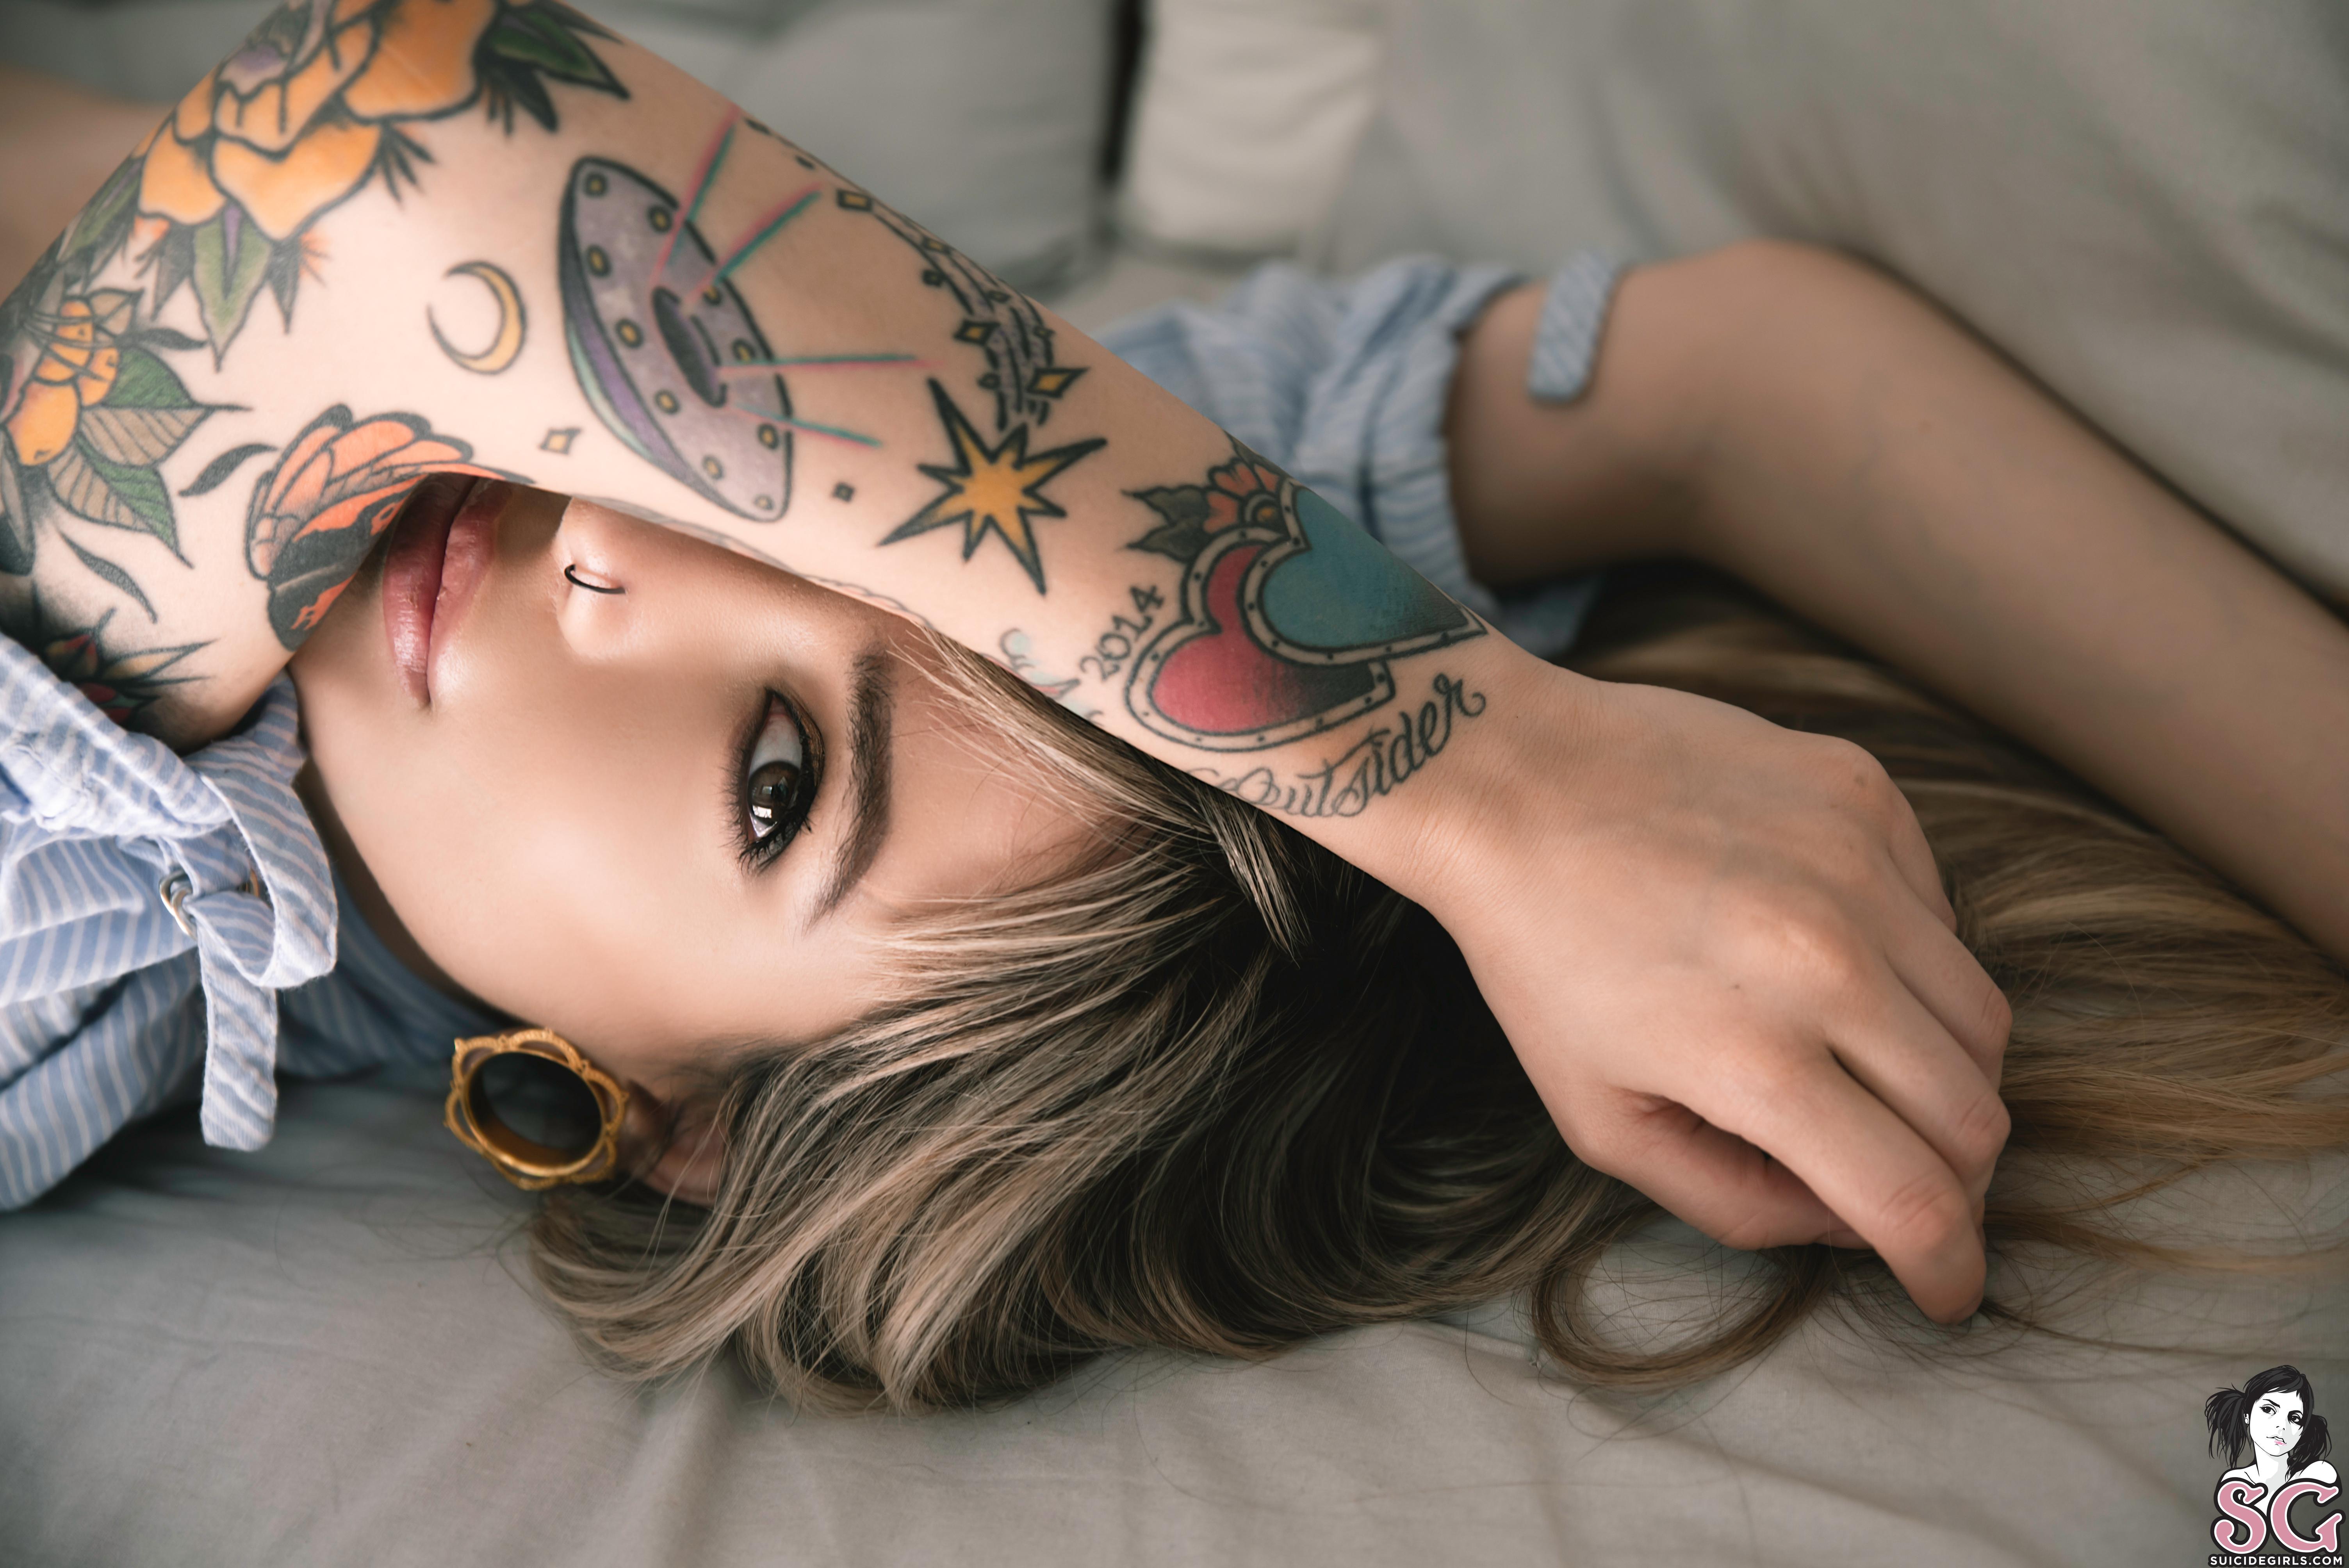 People 6016x4016 women model Suicide Girls Giuno Suicide inked girls tattoo women indoors looking at viewer pierced nose fake lips watermarked closeup